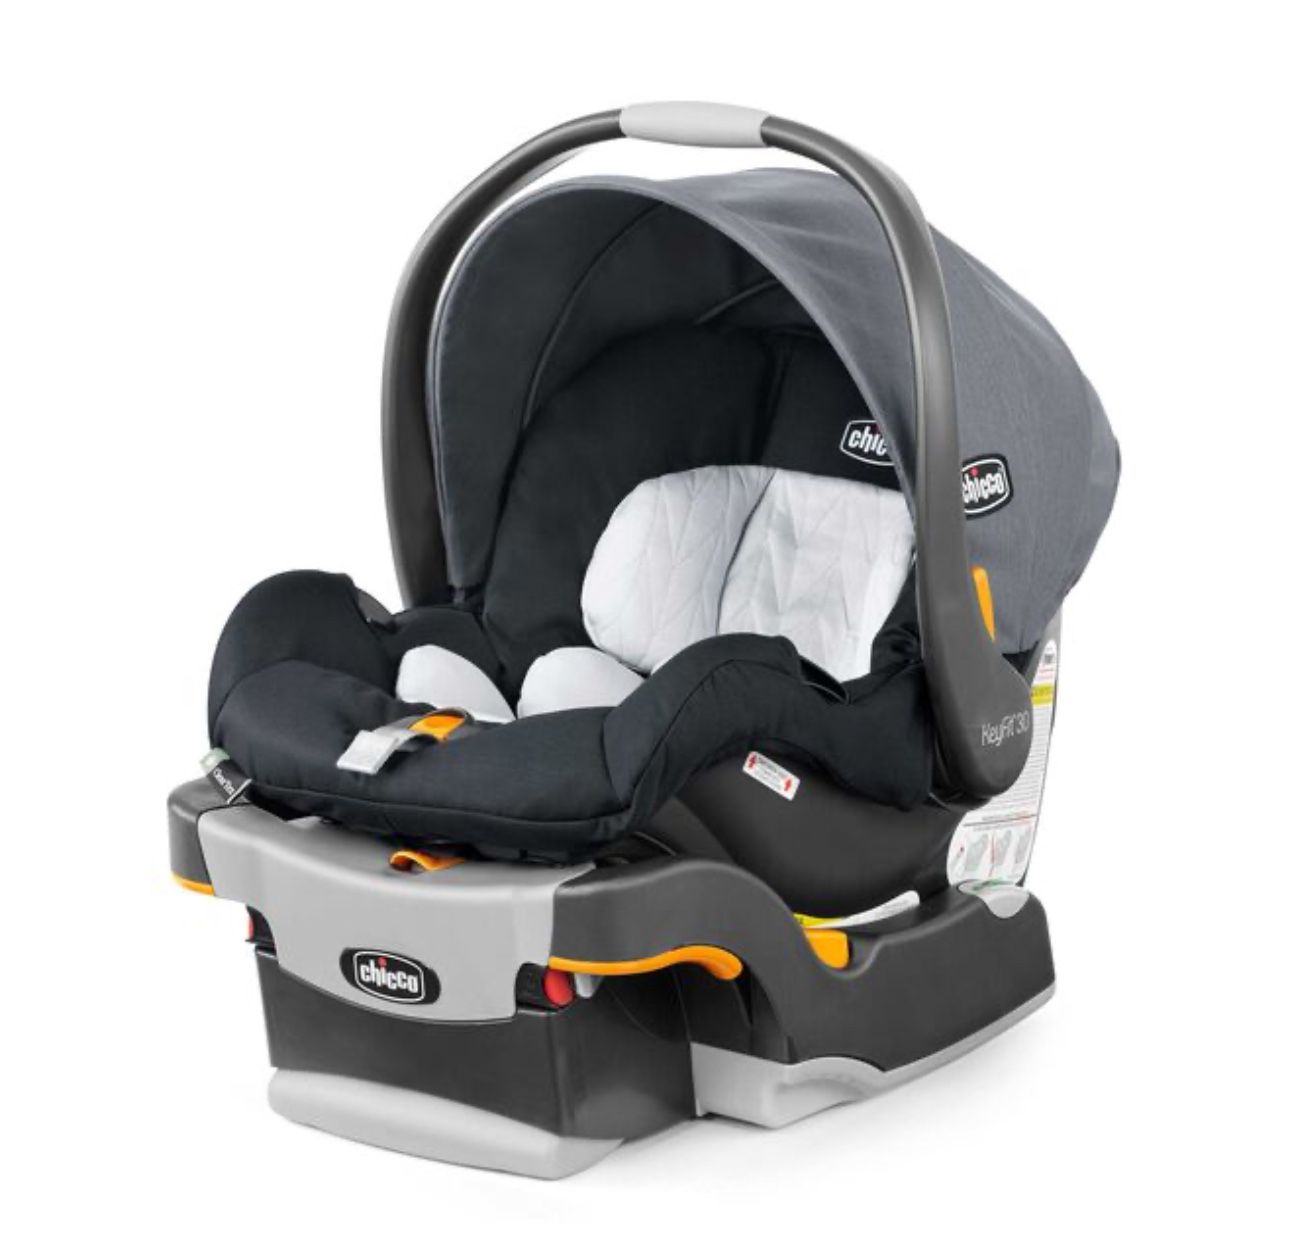 Chicco Key fit 30 Infant Car Seat With Base For Sale